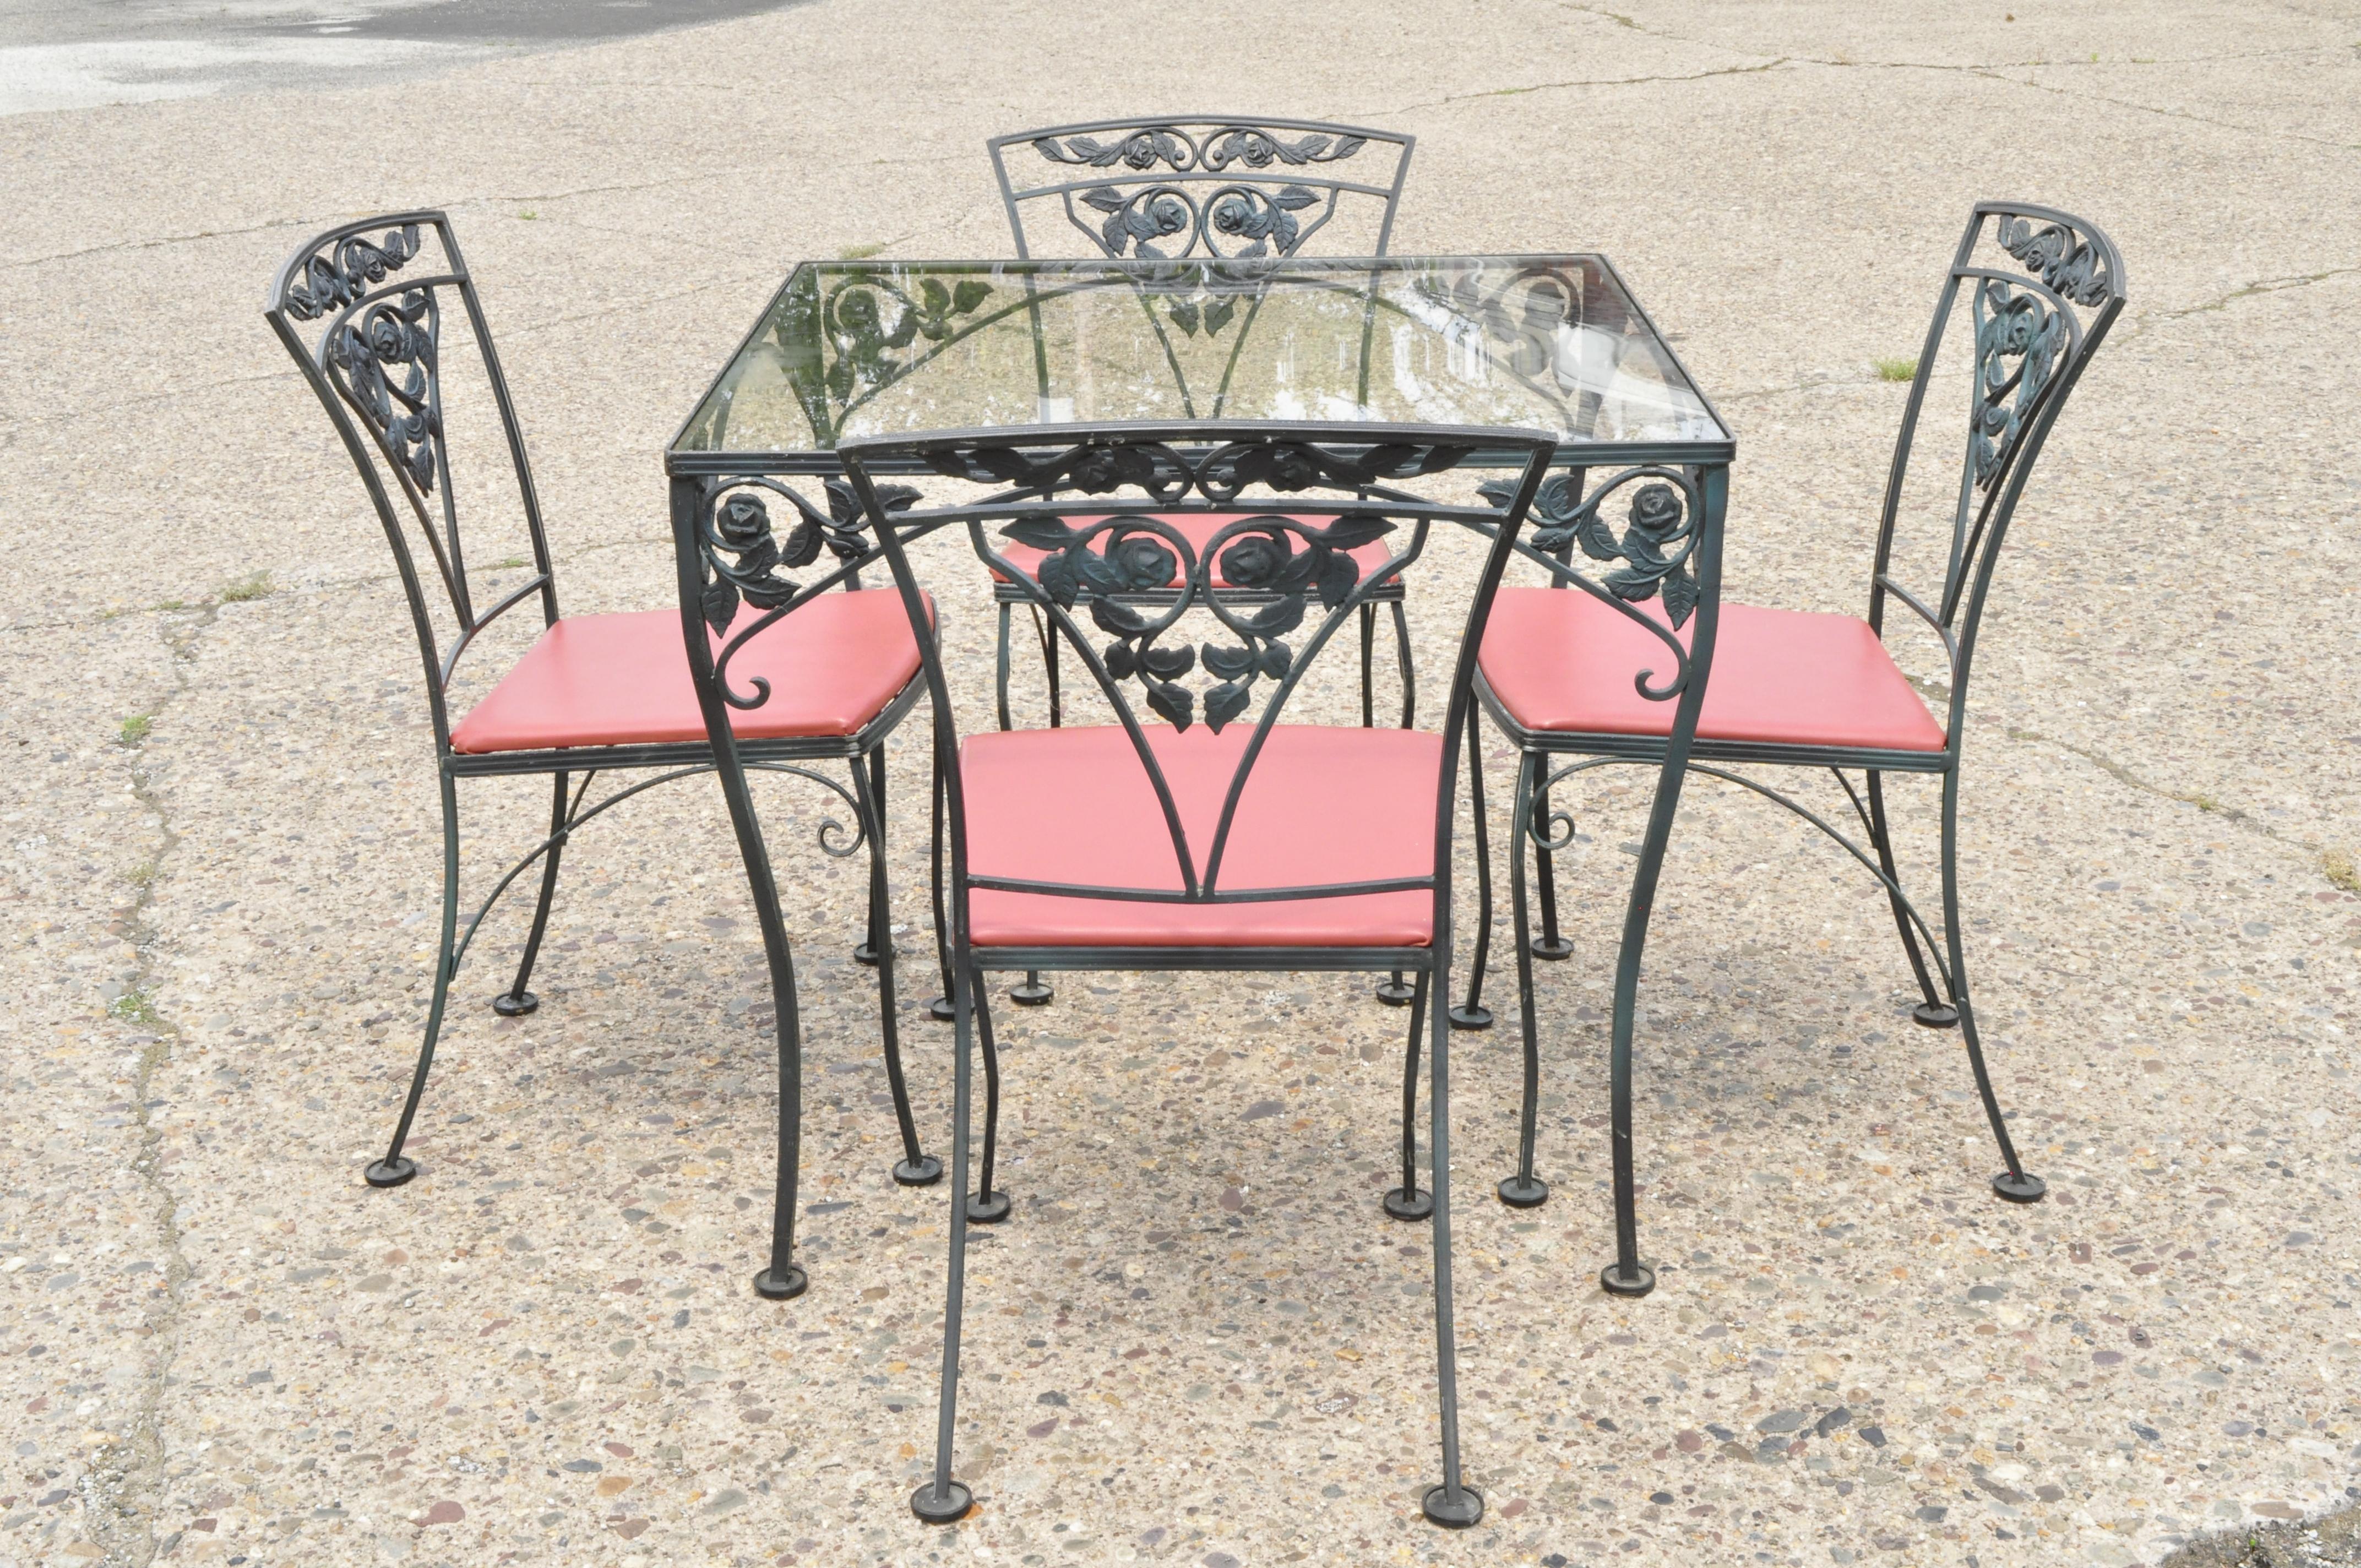 Glass Woodard Chantilly Rose Green Garden Patio Dining Set of 4 Chairs & Square Table